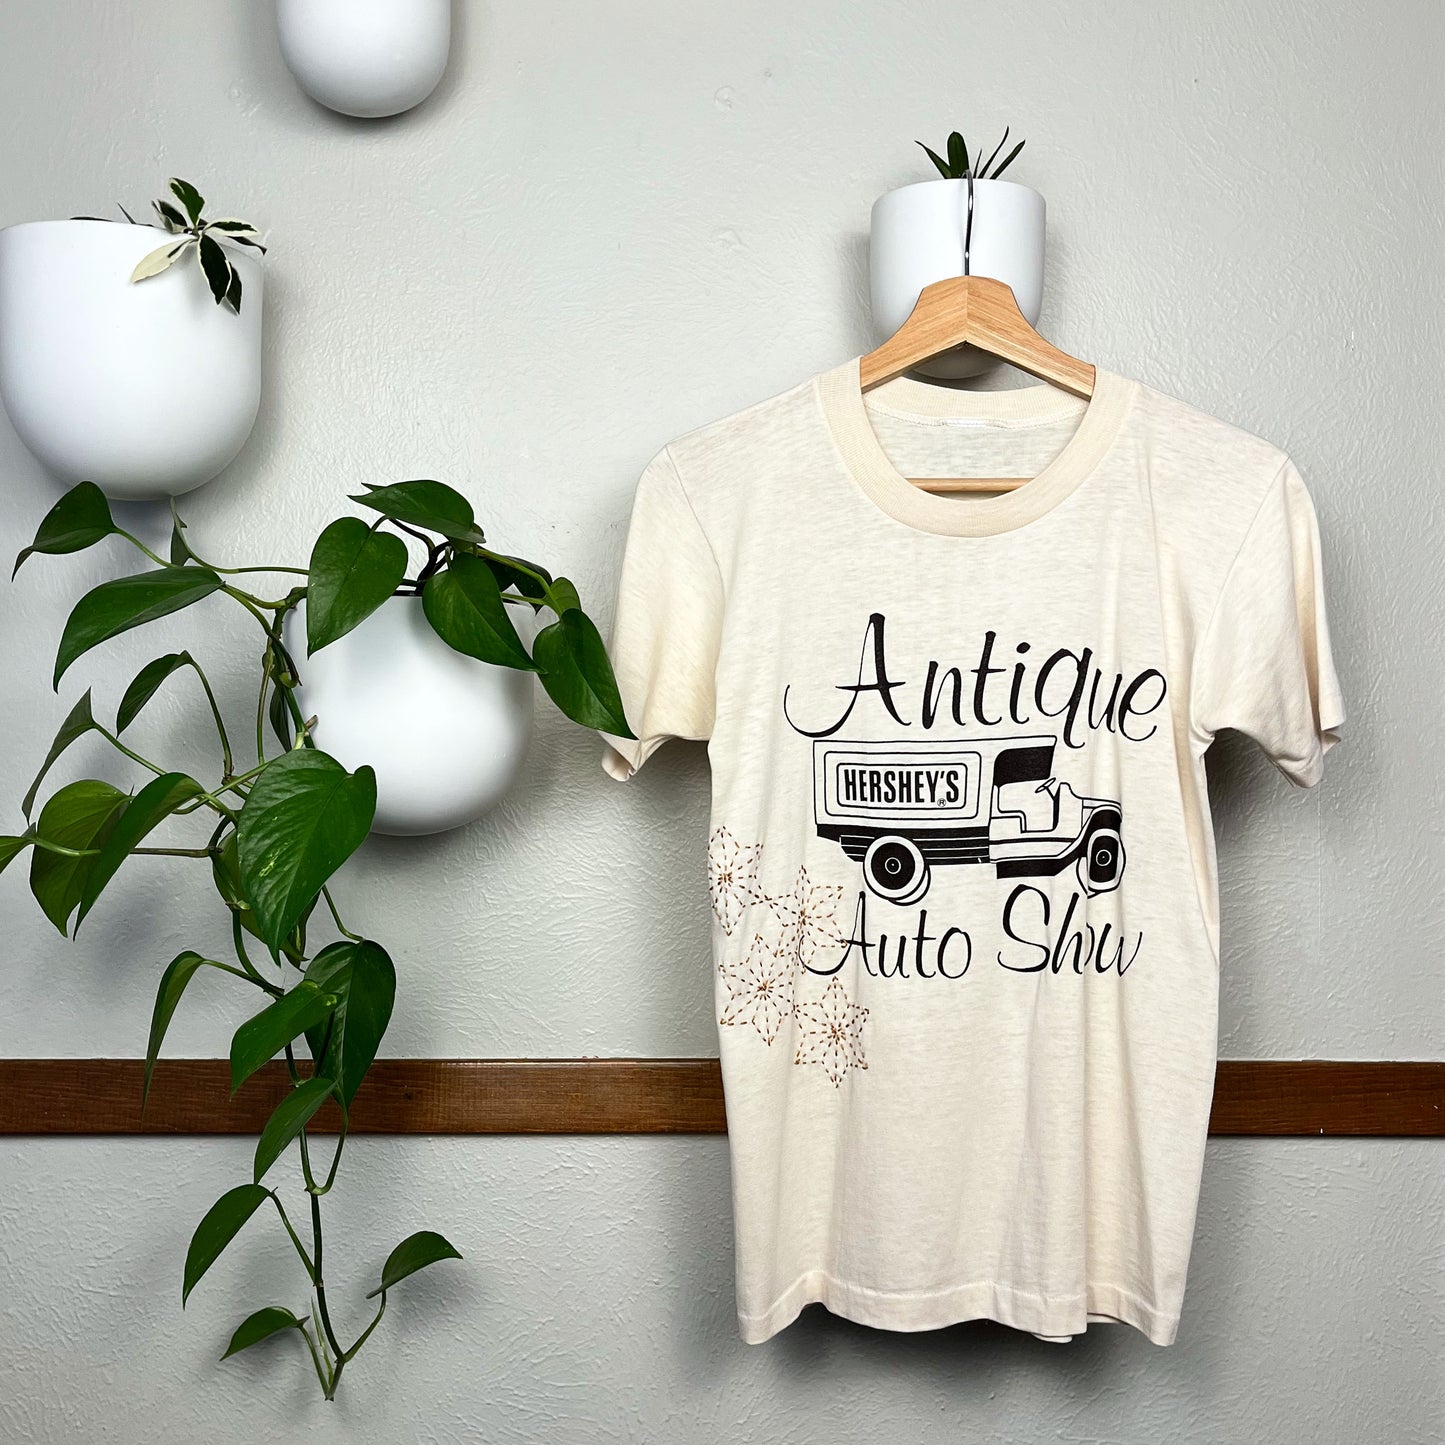 Cream colored T-shirt hanging on a hanger next to a pothos plant on a wall, the t-shirt has a graphic print of a truck that says Hershey's on the back, and the words Antique Auto Show printed around it, on the bottom side of the tee there are hand embroidered sashiko stars in mustard brown